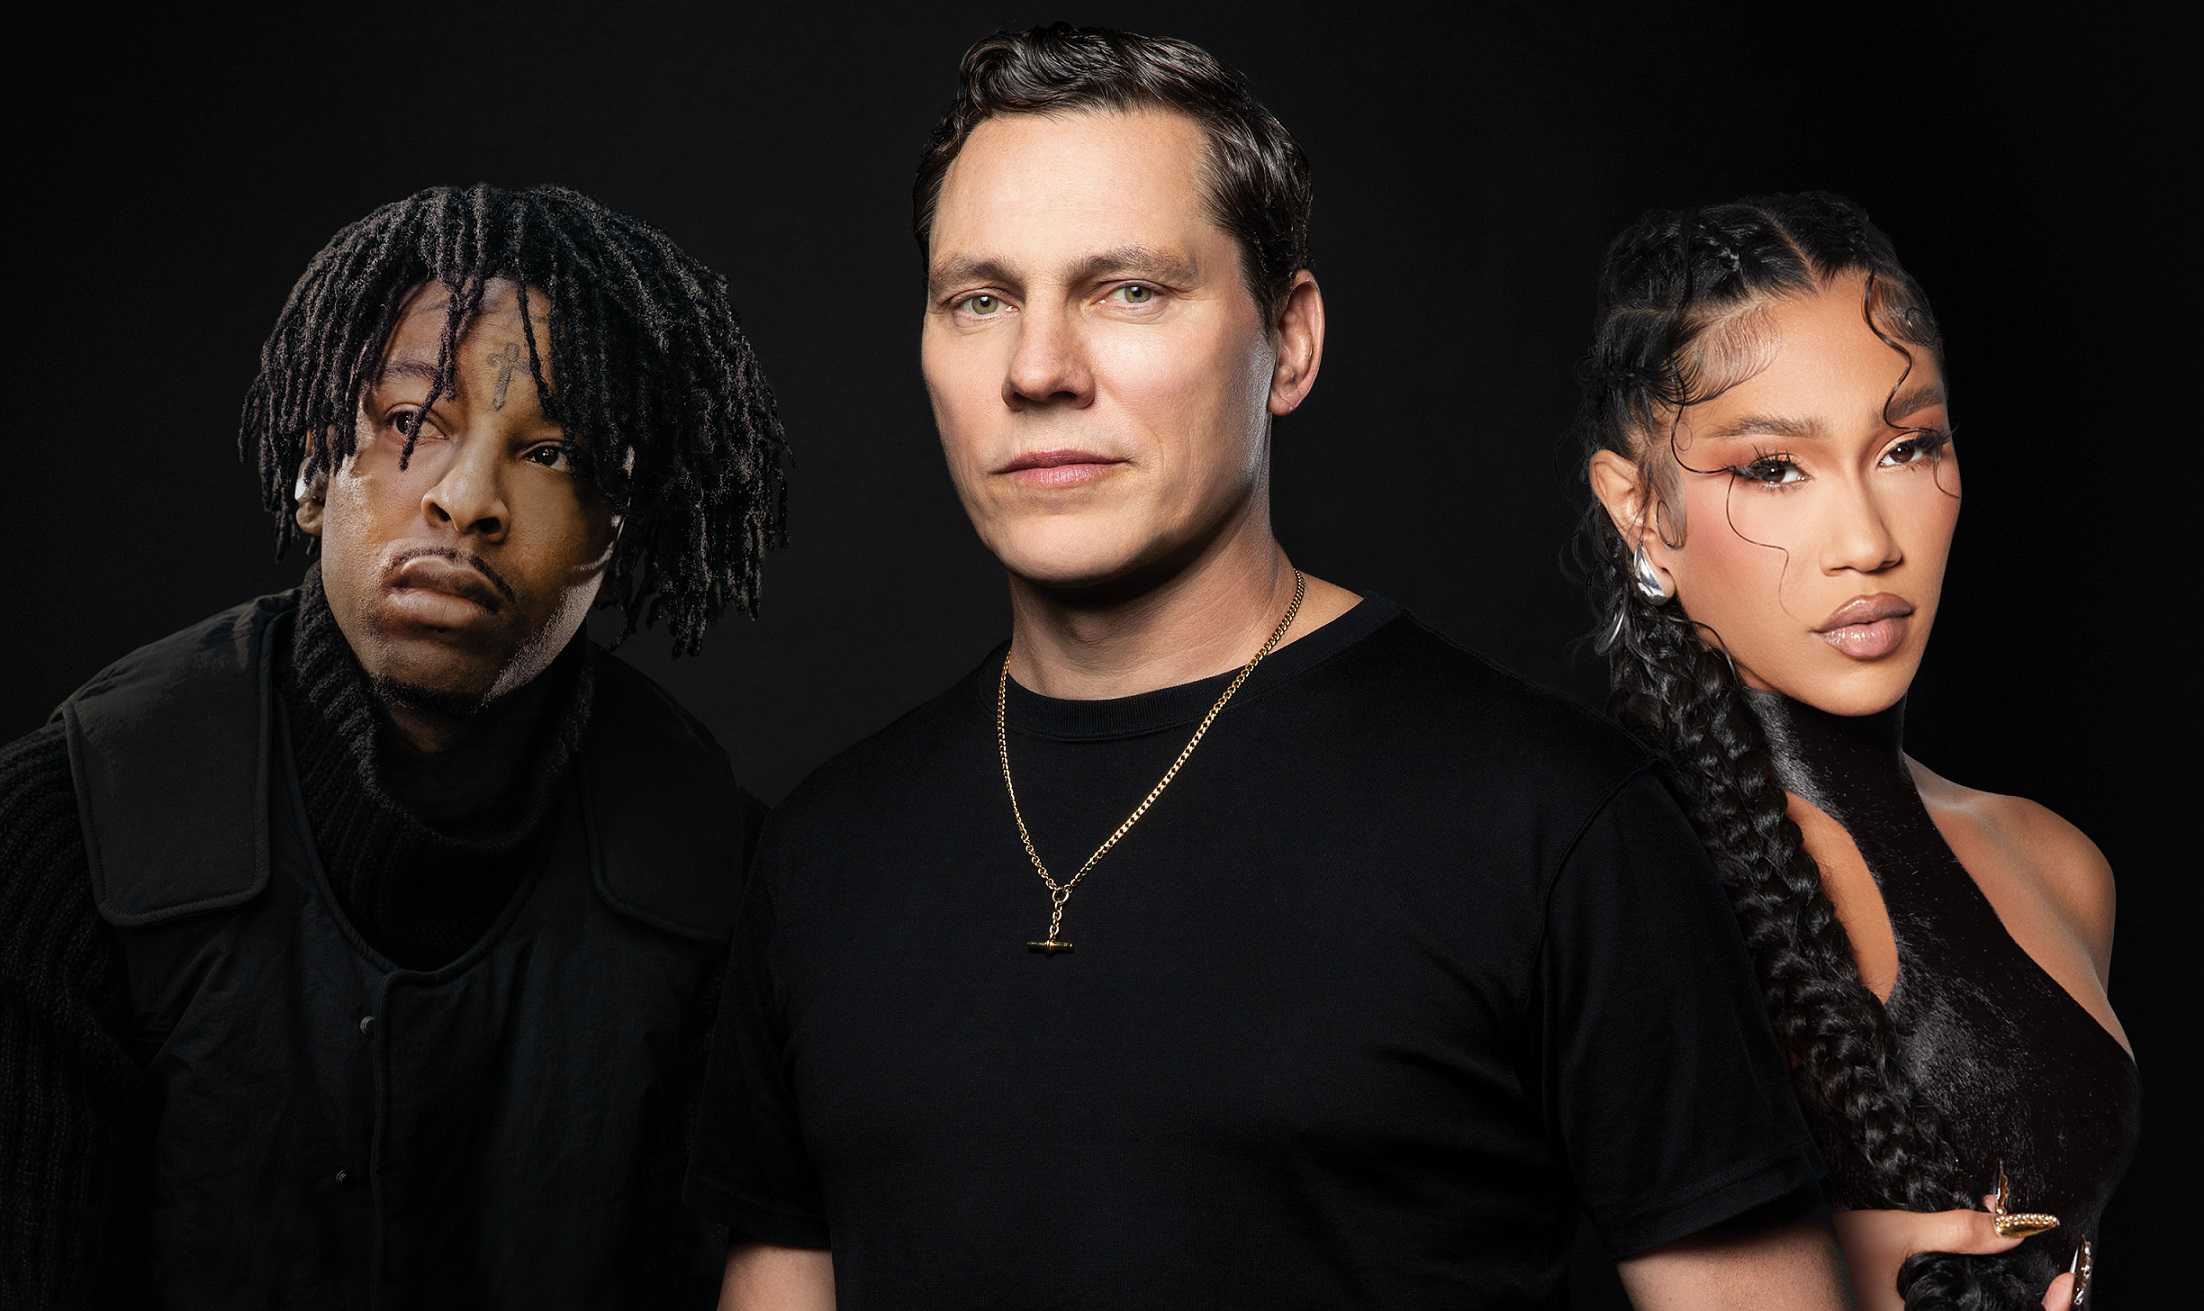 Tiësto unites with BIA & 21 Savage on hip-hop inspired record ‘BOTH’: Listen